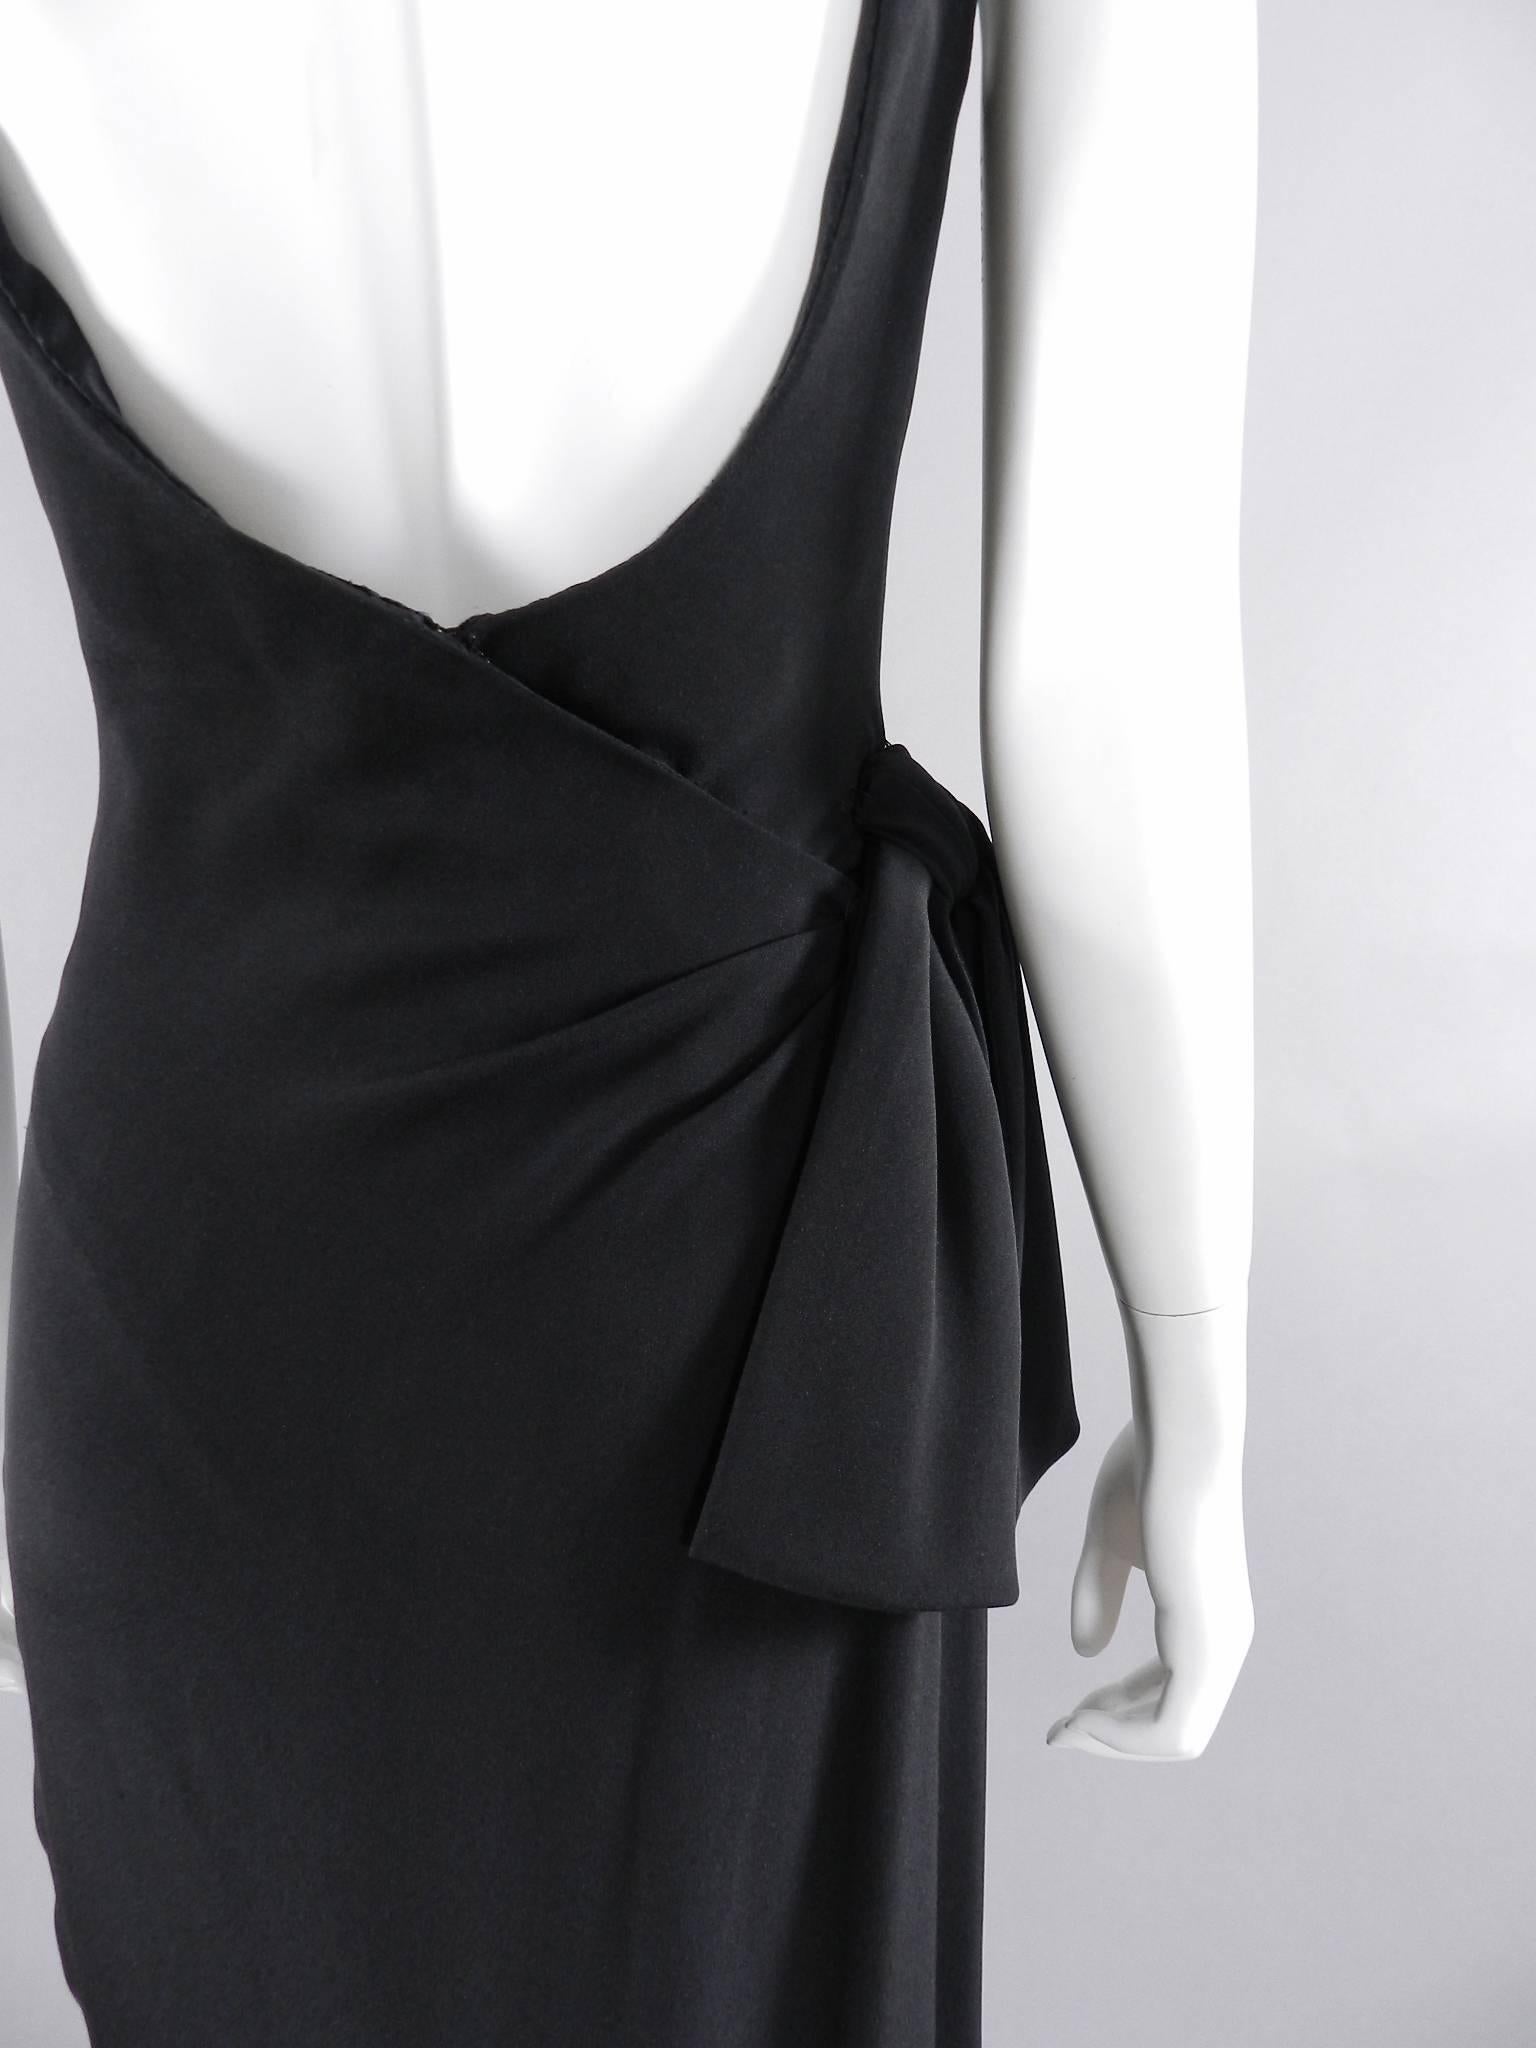 Yves Saint Laurent AW 1998 Haute Couture Black Low Back Evening Gown For Sale 3